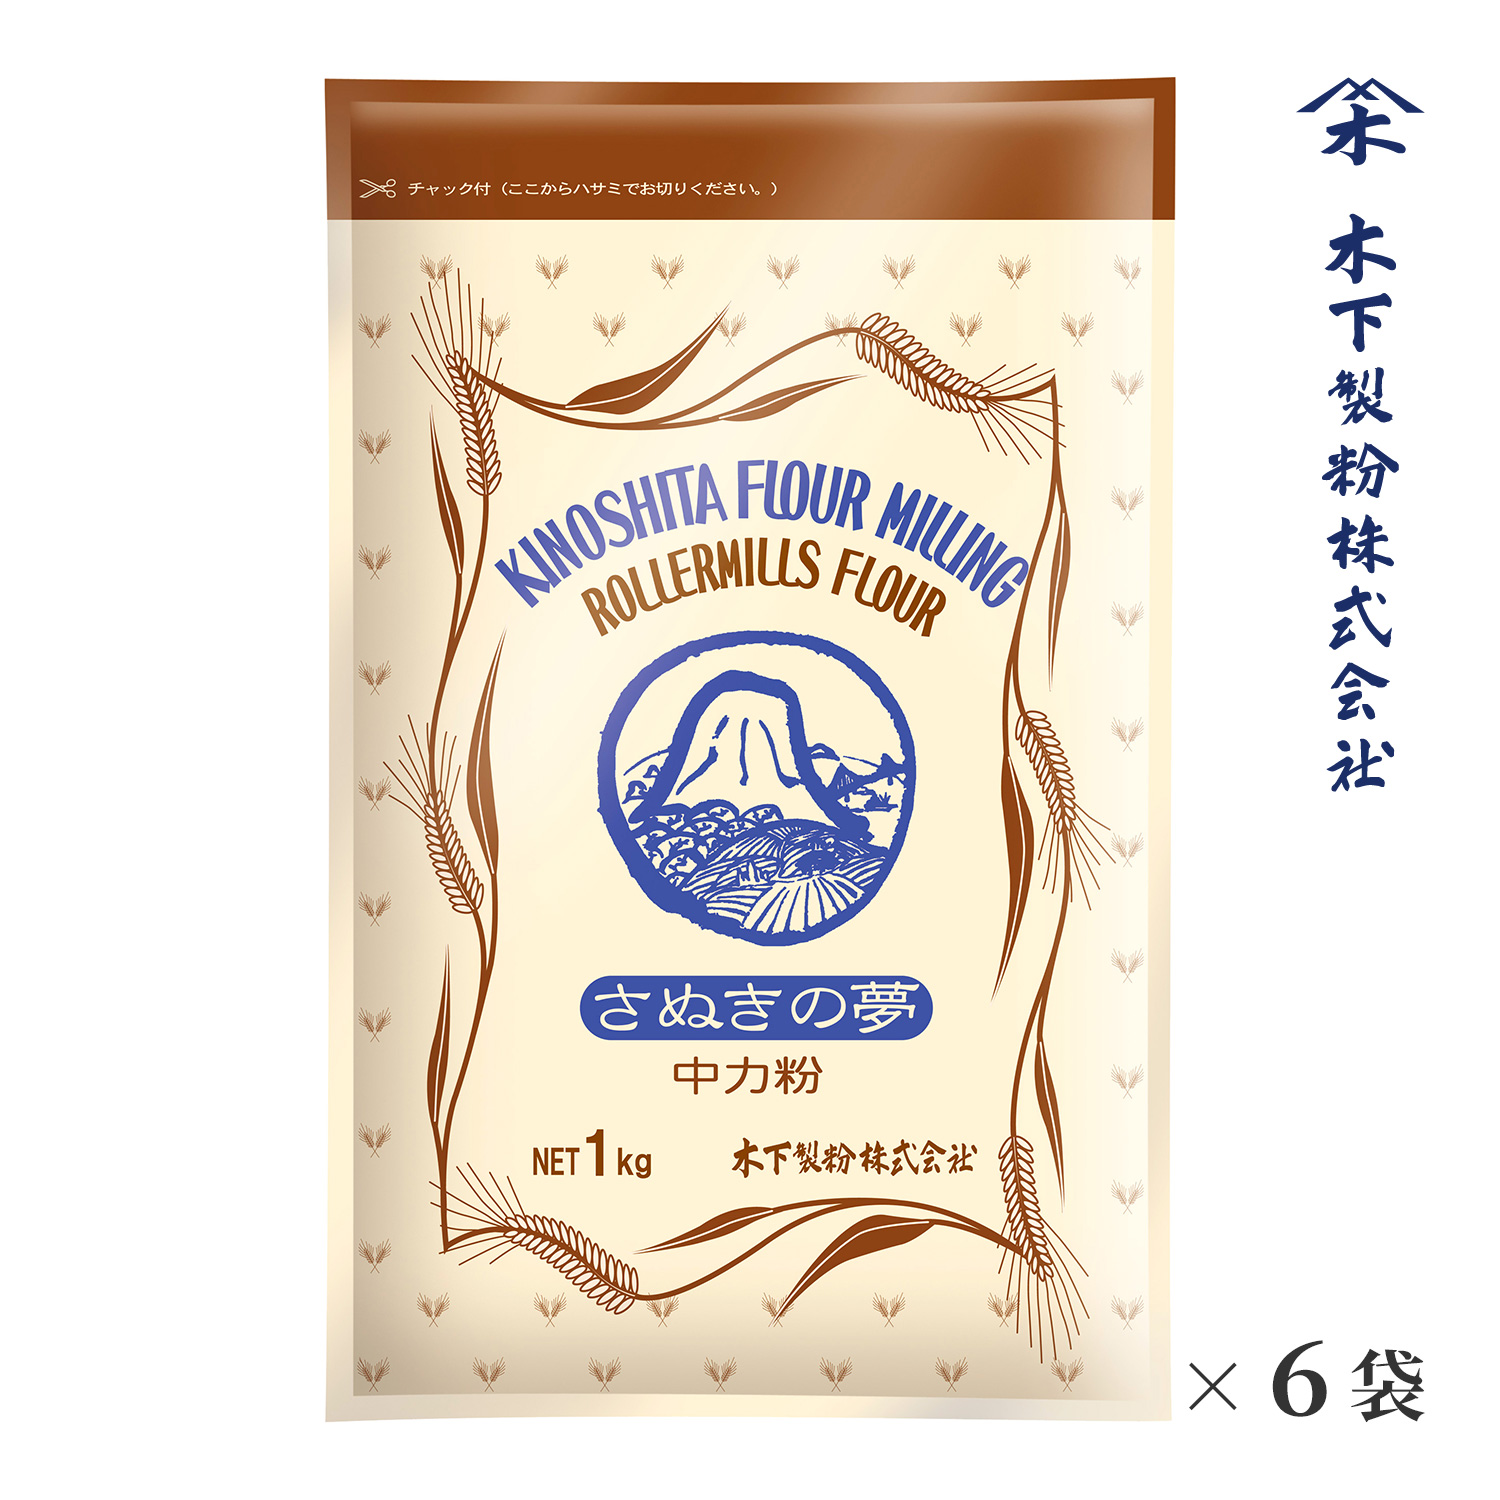  tree under made flour .... dream 6kg(1kg×6 sack ) domestic production wheat 100% hand strike . udon for middle power flour wheat flour zipper attaching laminate sack fa Lee na corporation 